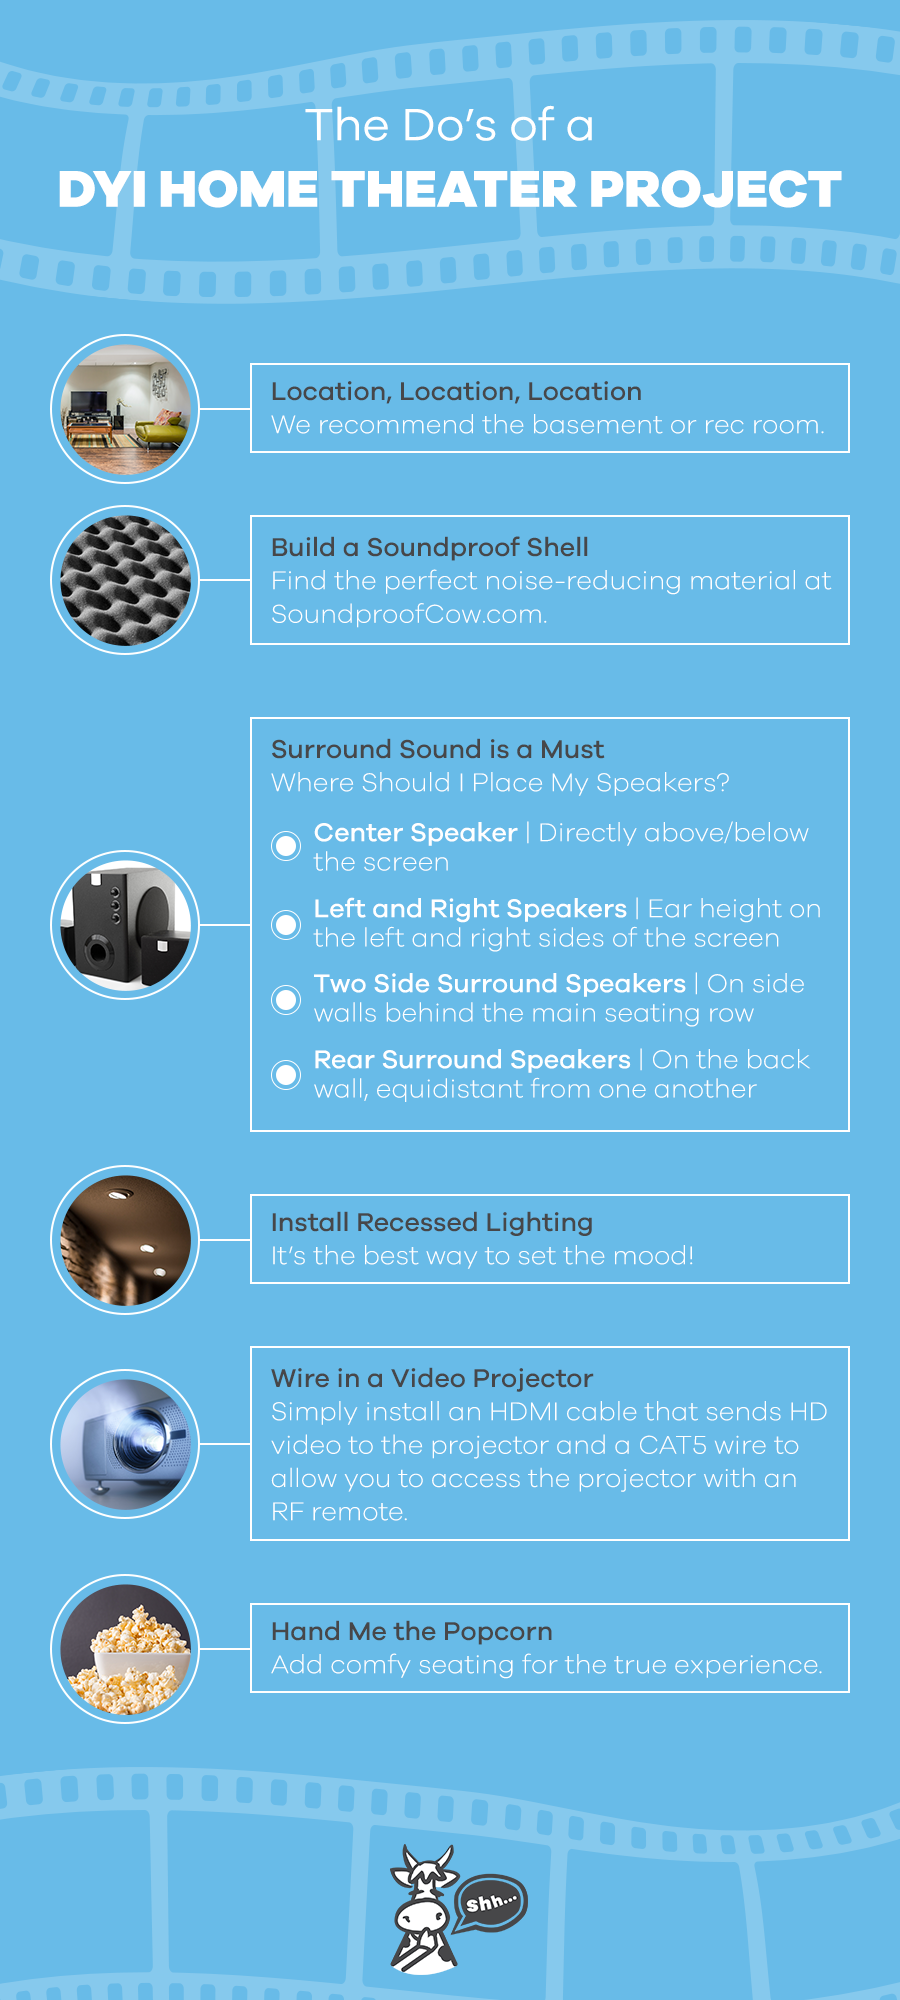 The do's of a diy home theater project